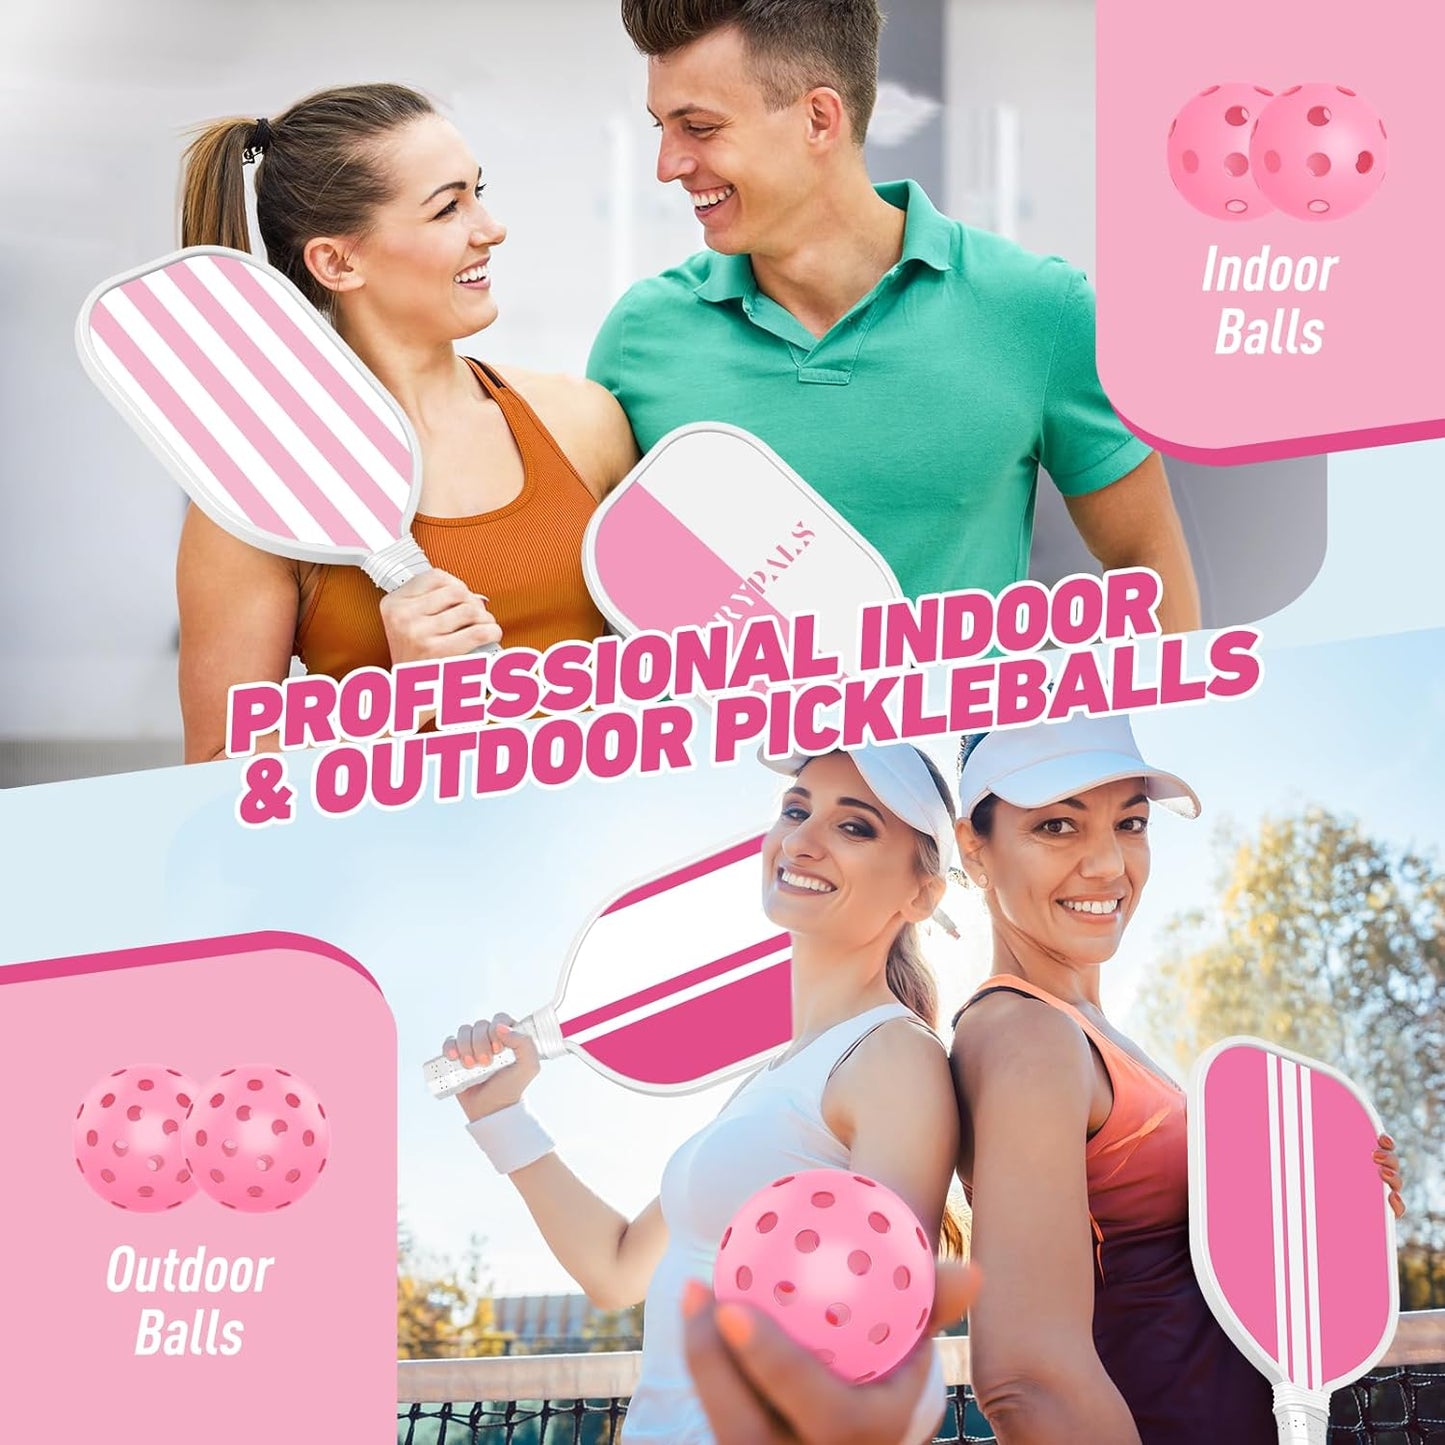 Sprypals Pink Pickleball Paddles Set of 4